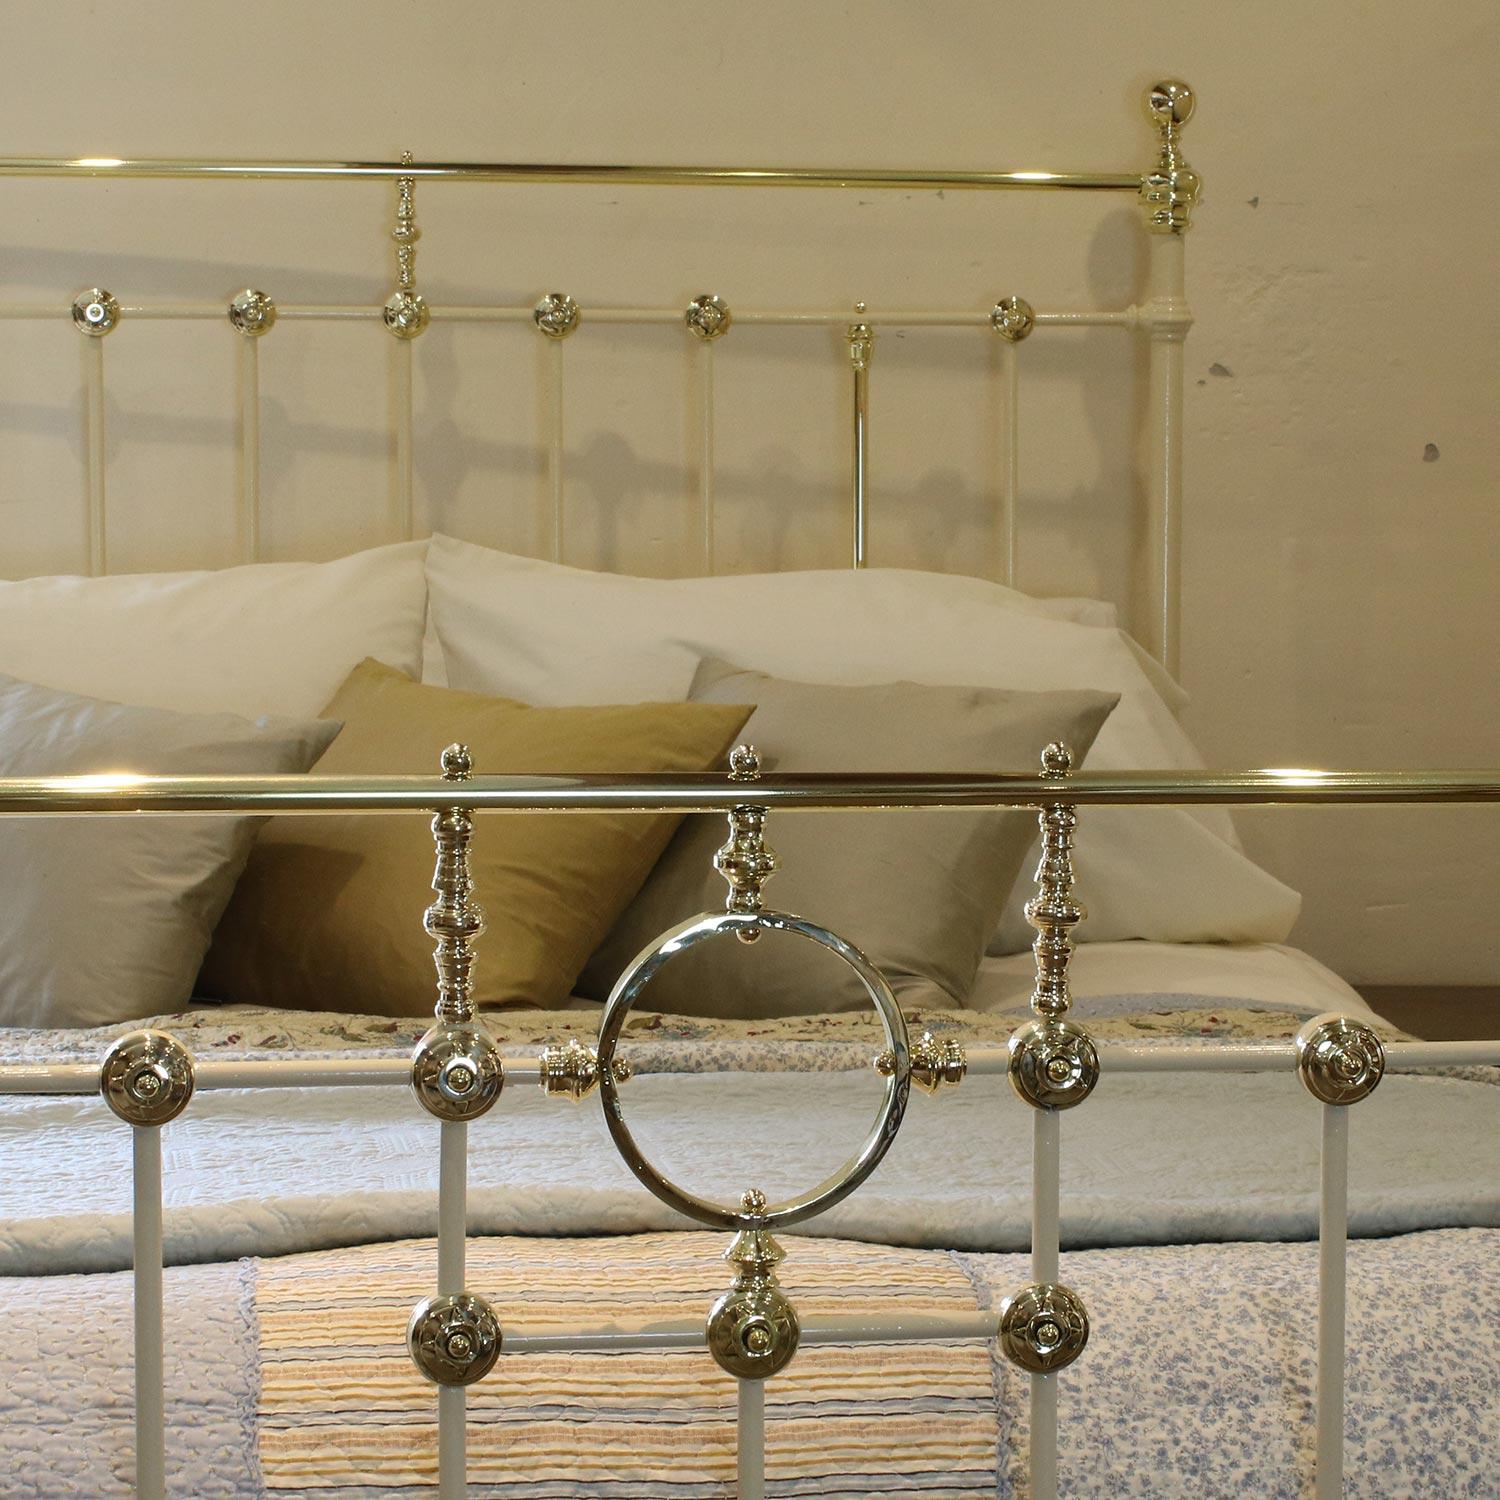 A brass and iron bedstead adapted from an original Victorian frame, finished in cream with decorative brass rosettes and central ring.

This bed accepts a British king-size or US queen-size (measure: 5ft, 60 in or 150cm wide) base and mattress